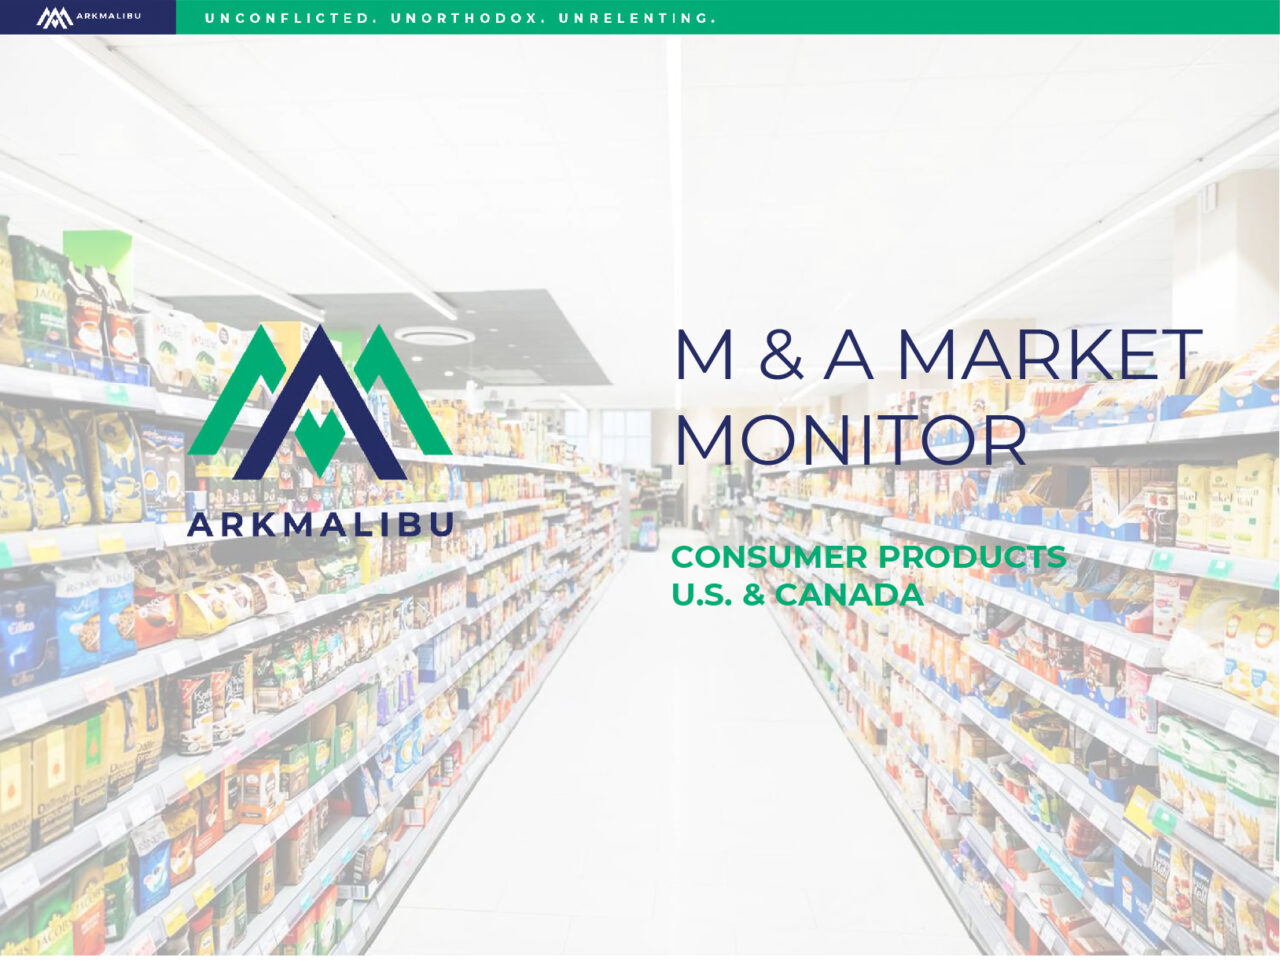 Market Monitor Cover for Consumer Products. Faded Image of a fully stocked Grocery Store aisle in the background